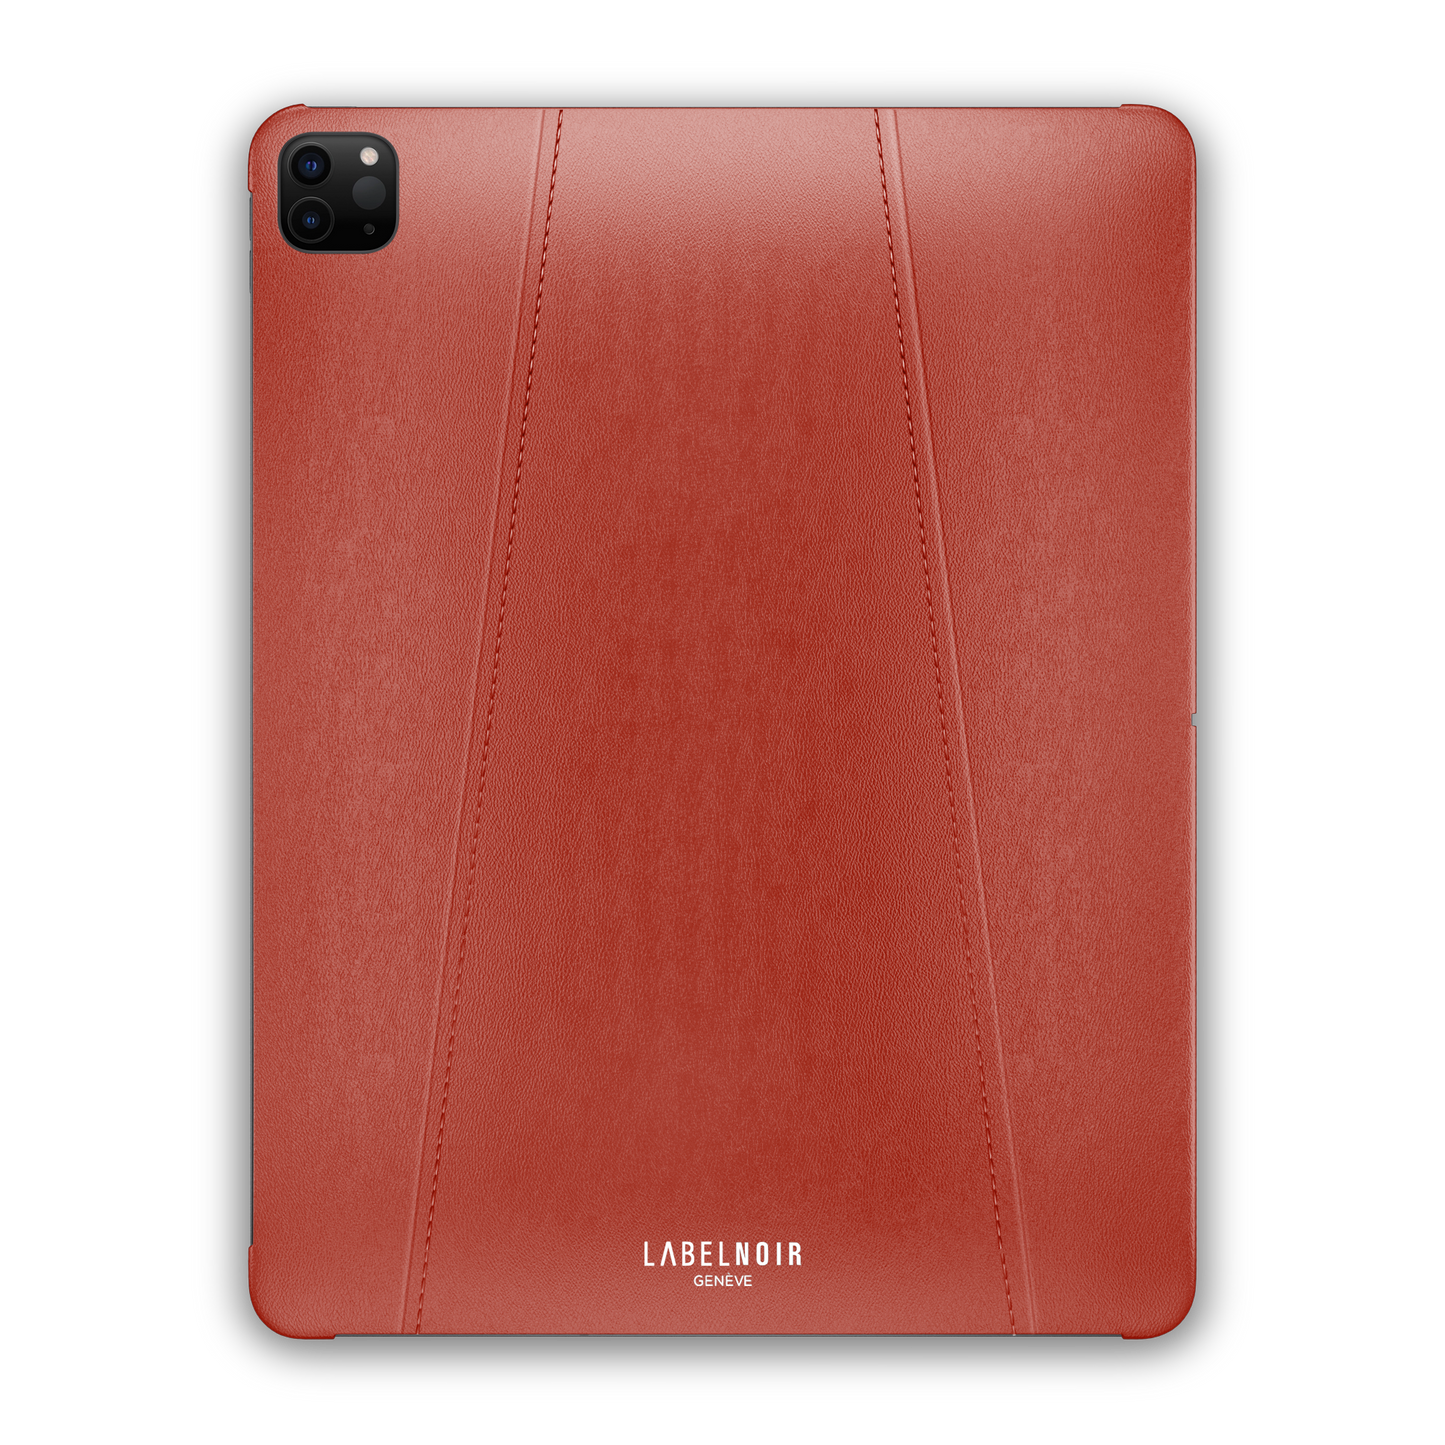 Ipad Pro (6th Gen) 12.9-inch Red Leather Case